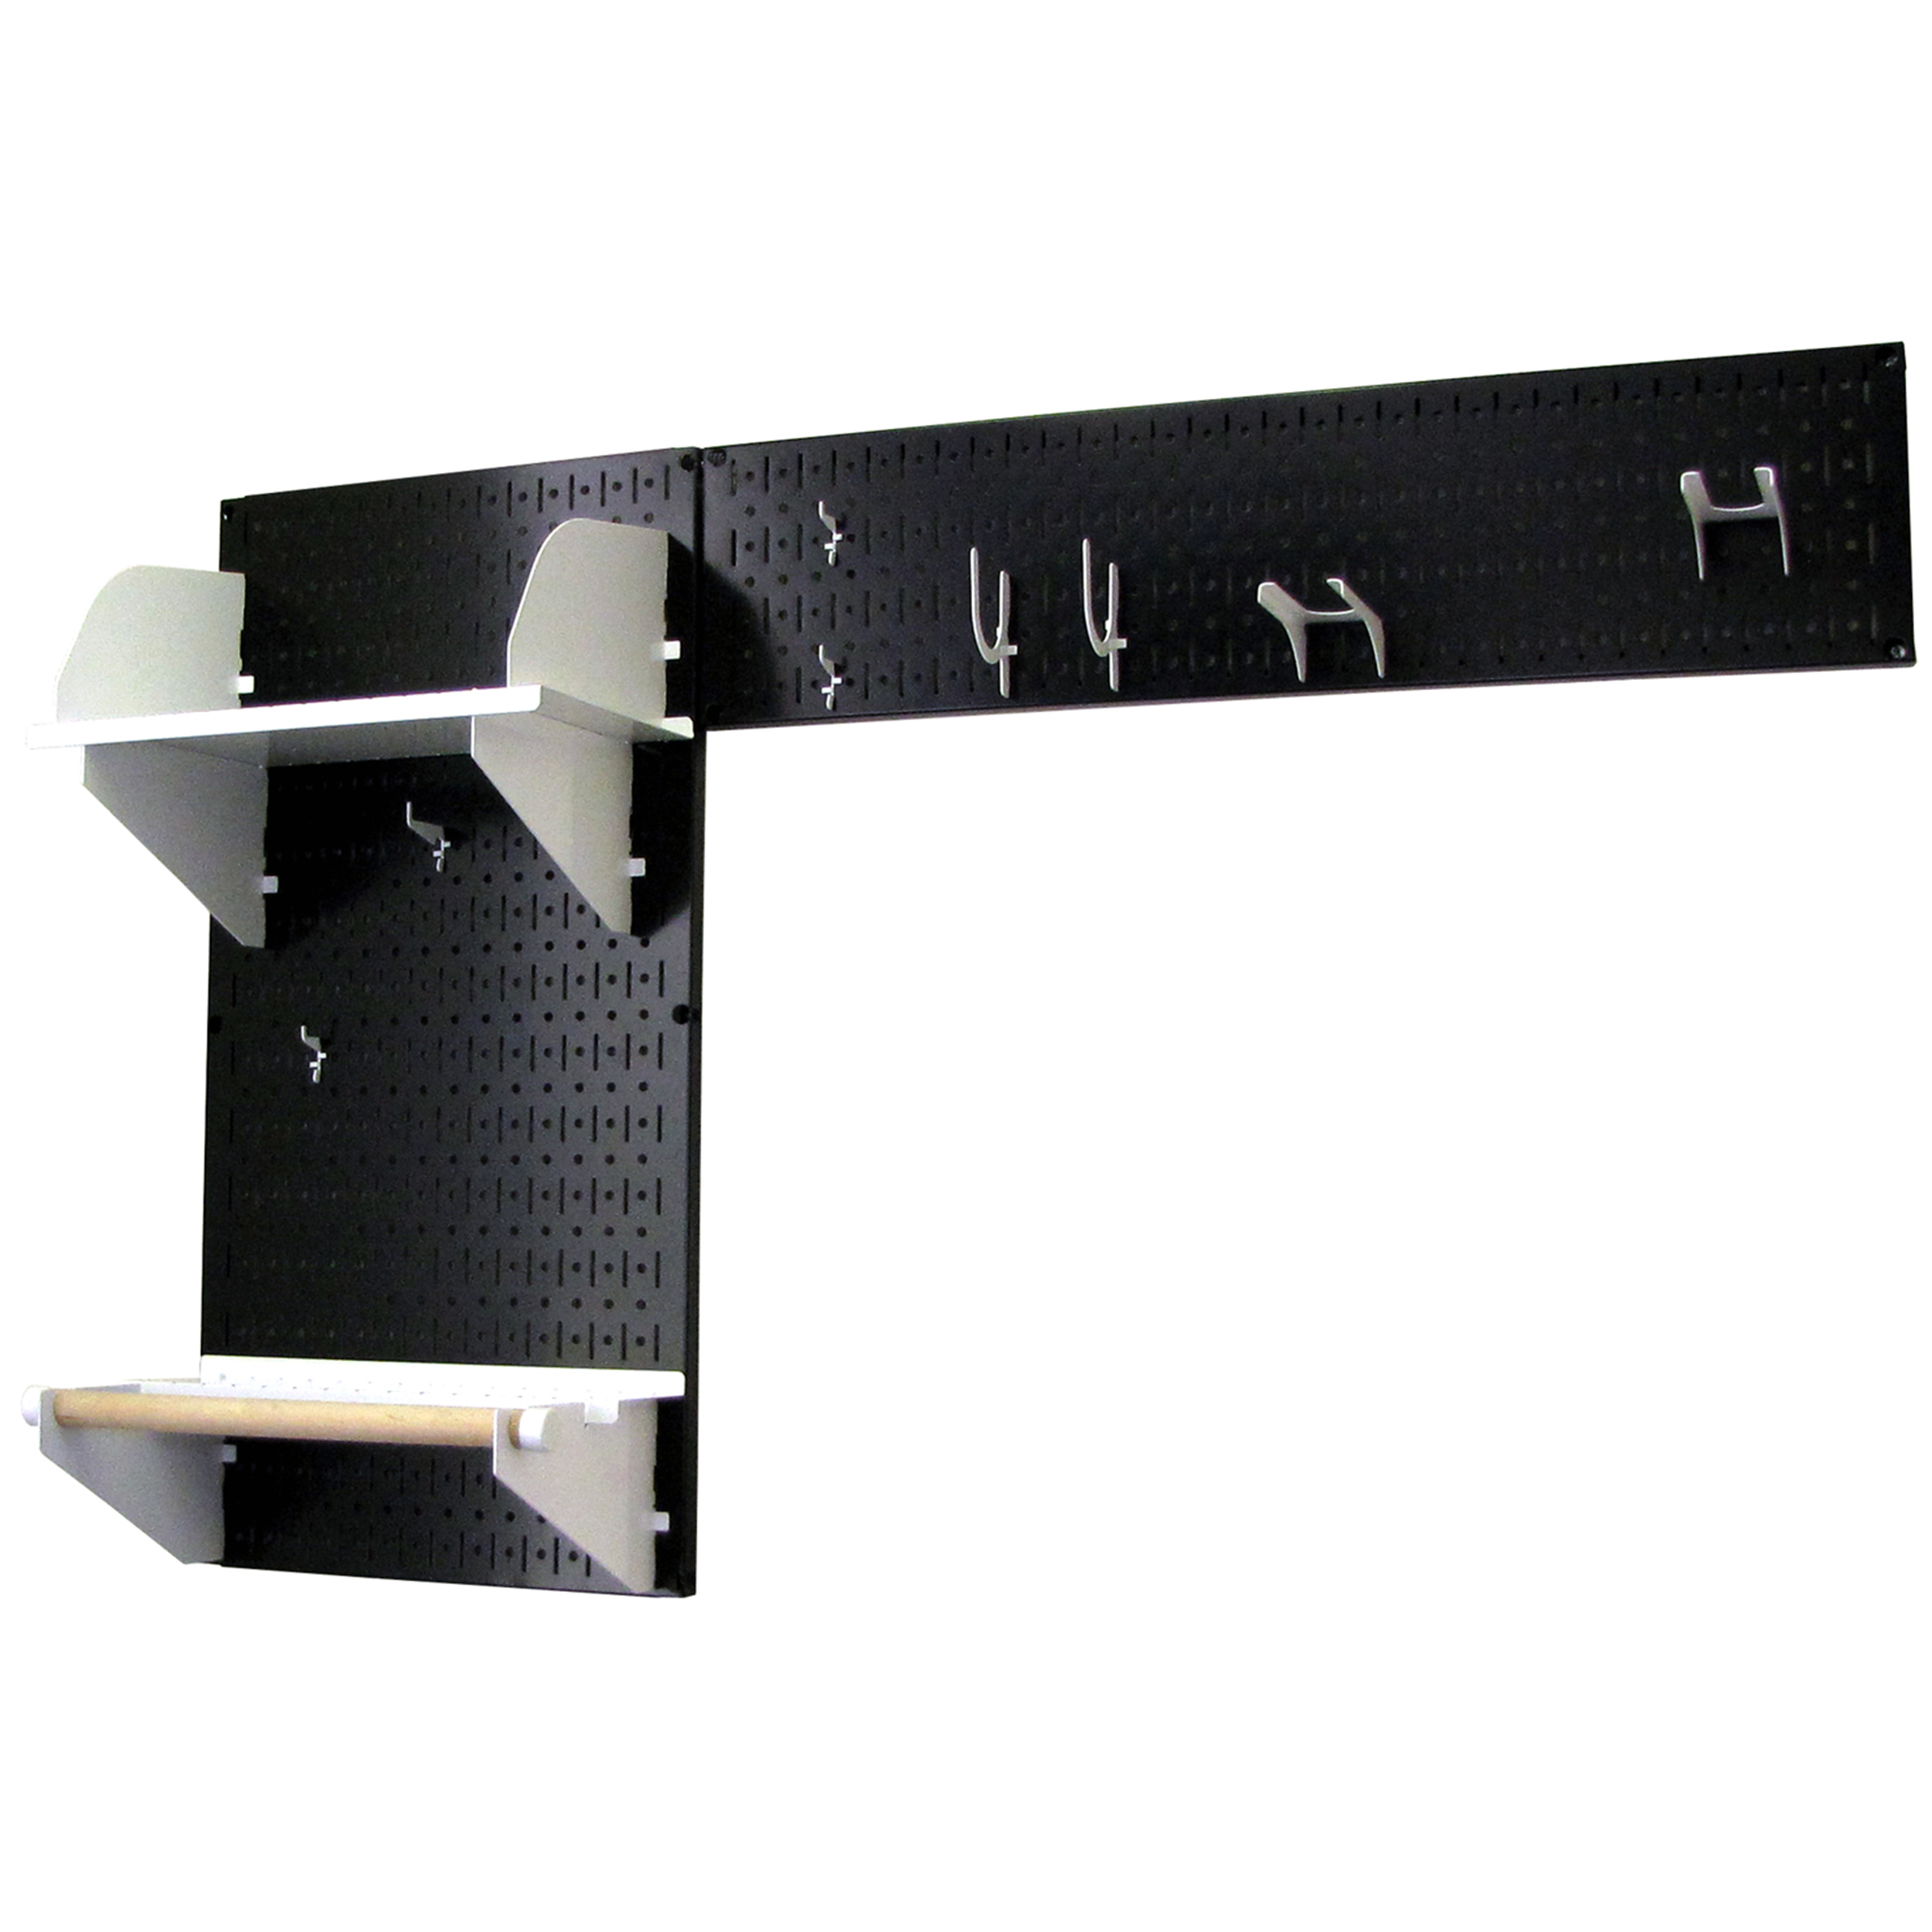 Pegboard Garden Tool Board Organizer With Black Pegboard And White Accessories